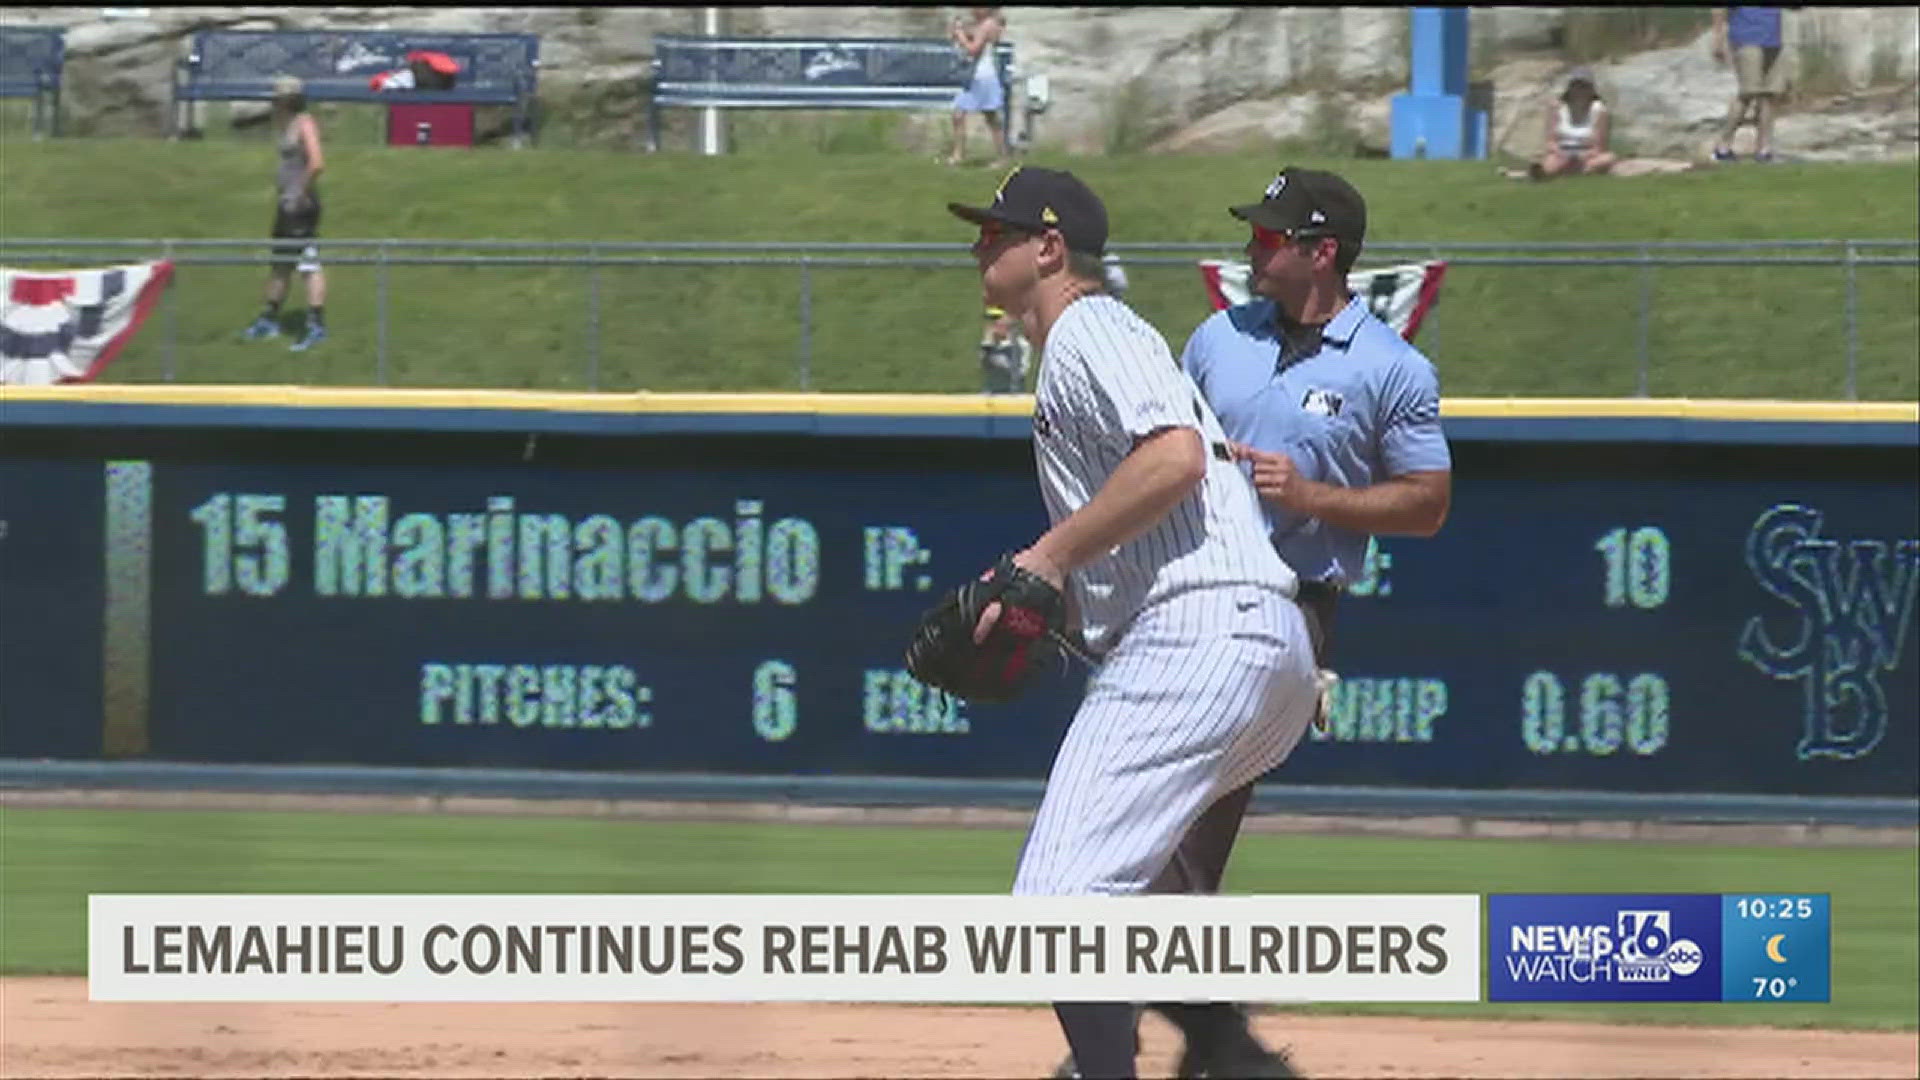 After two games with the RailRiders, LeMahieu will return to the Yankees